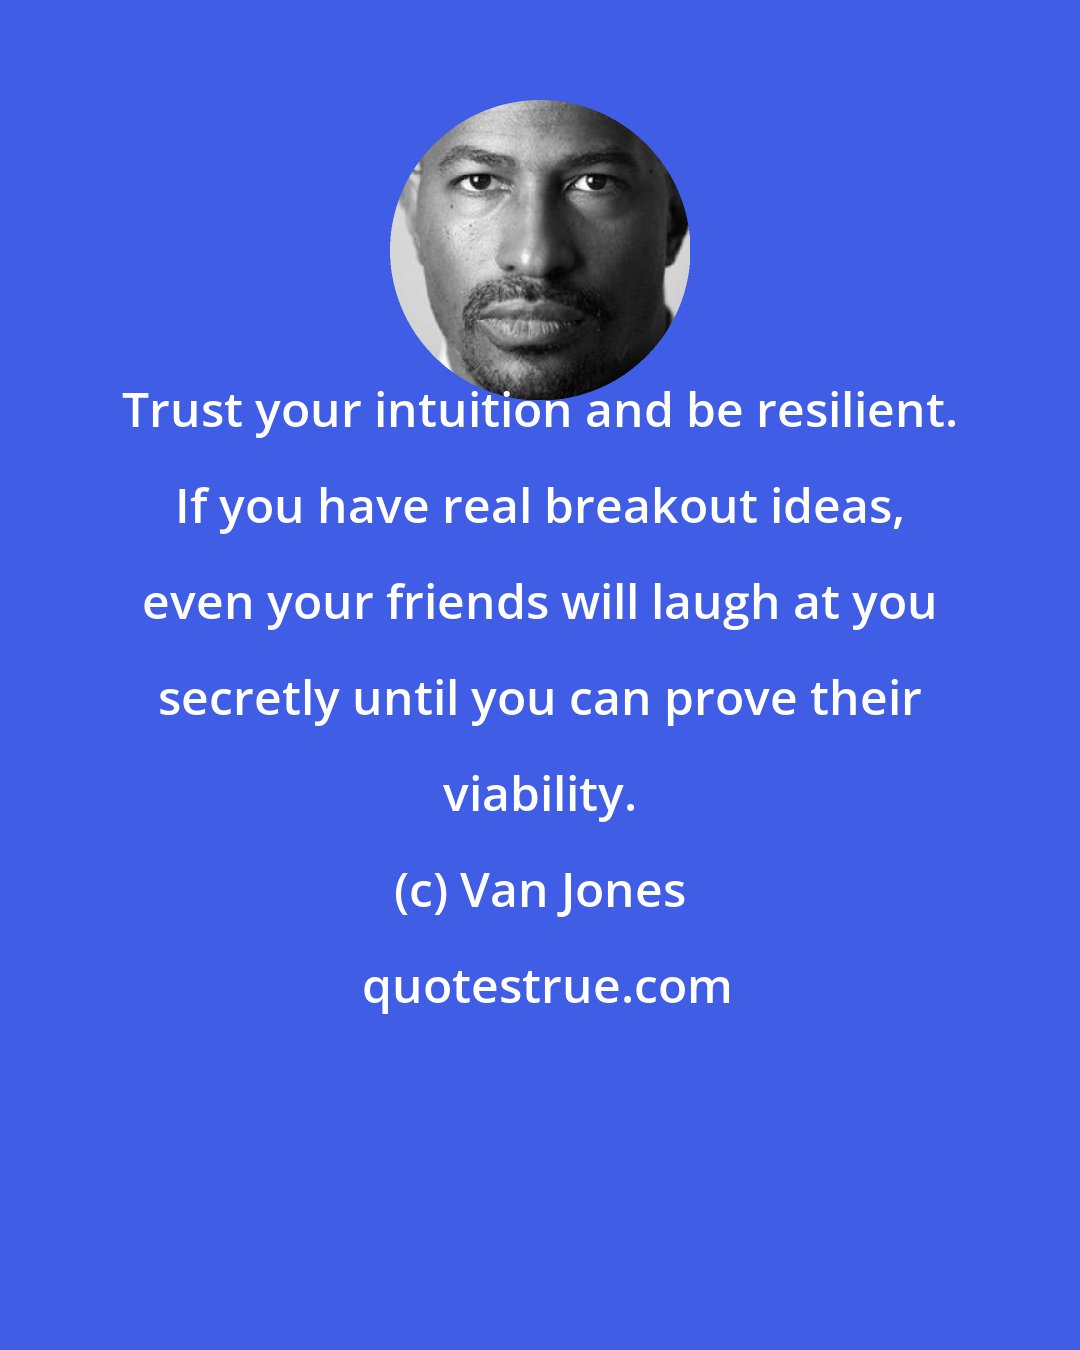 Van Jones: Trust your intuition and be resilient. If you have real breakout ideas, even your friends will laugh at you secretly until you can prove their viability.